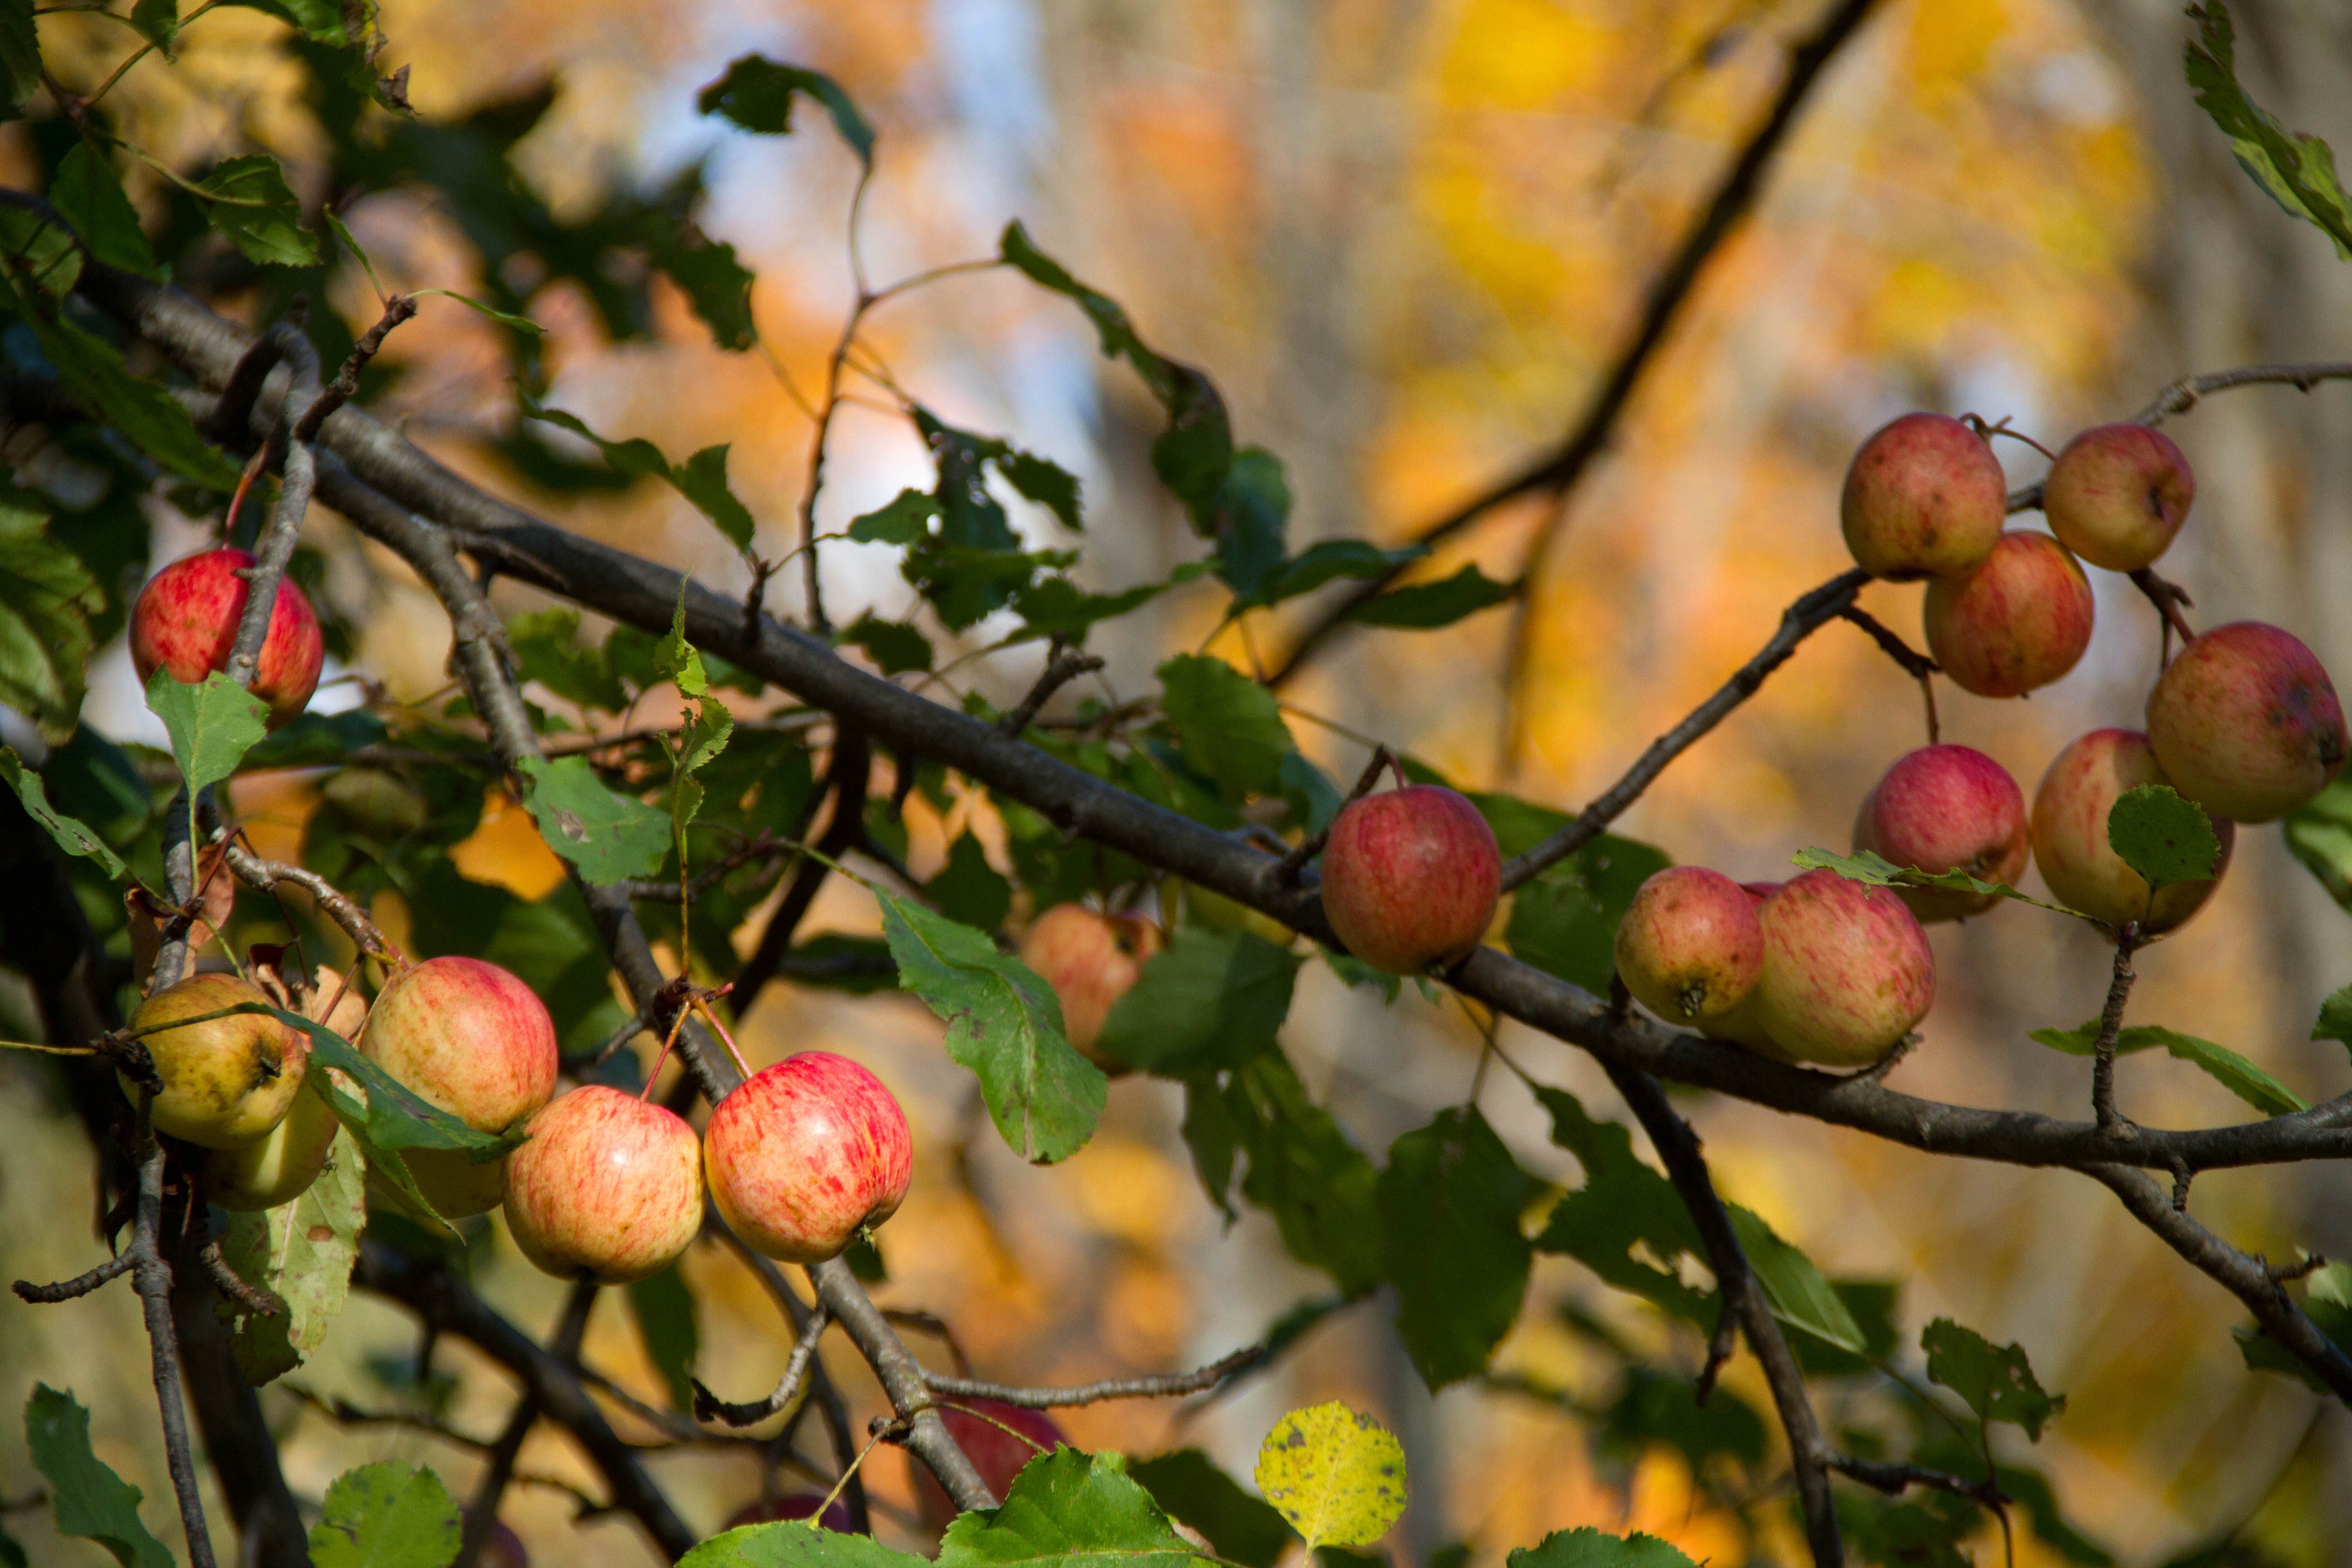 The old apple trees are still producing lots and lots of apples.